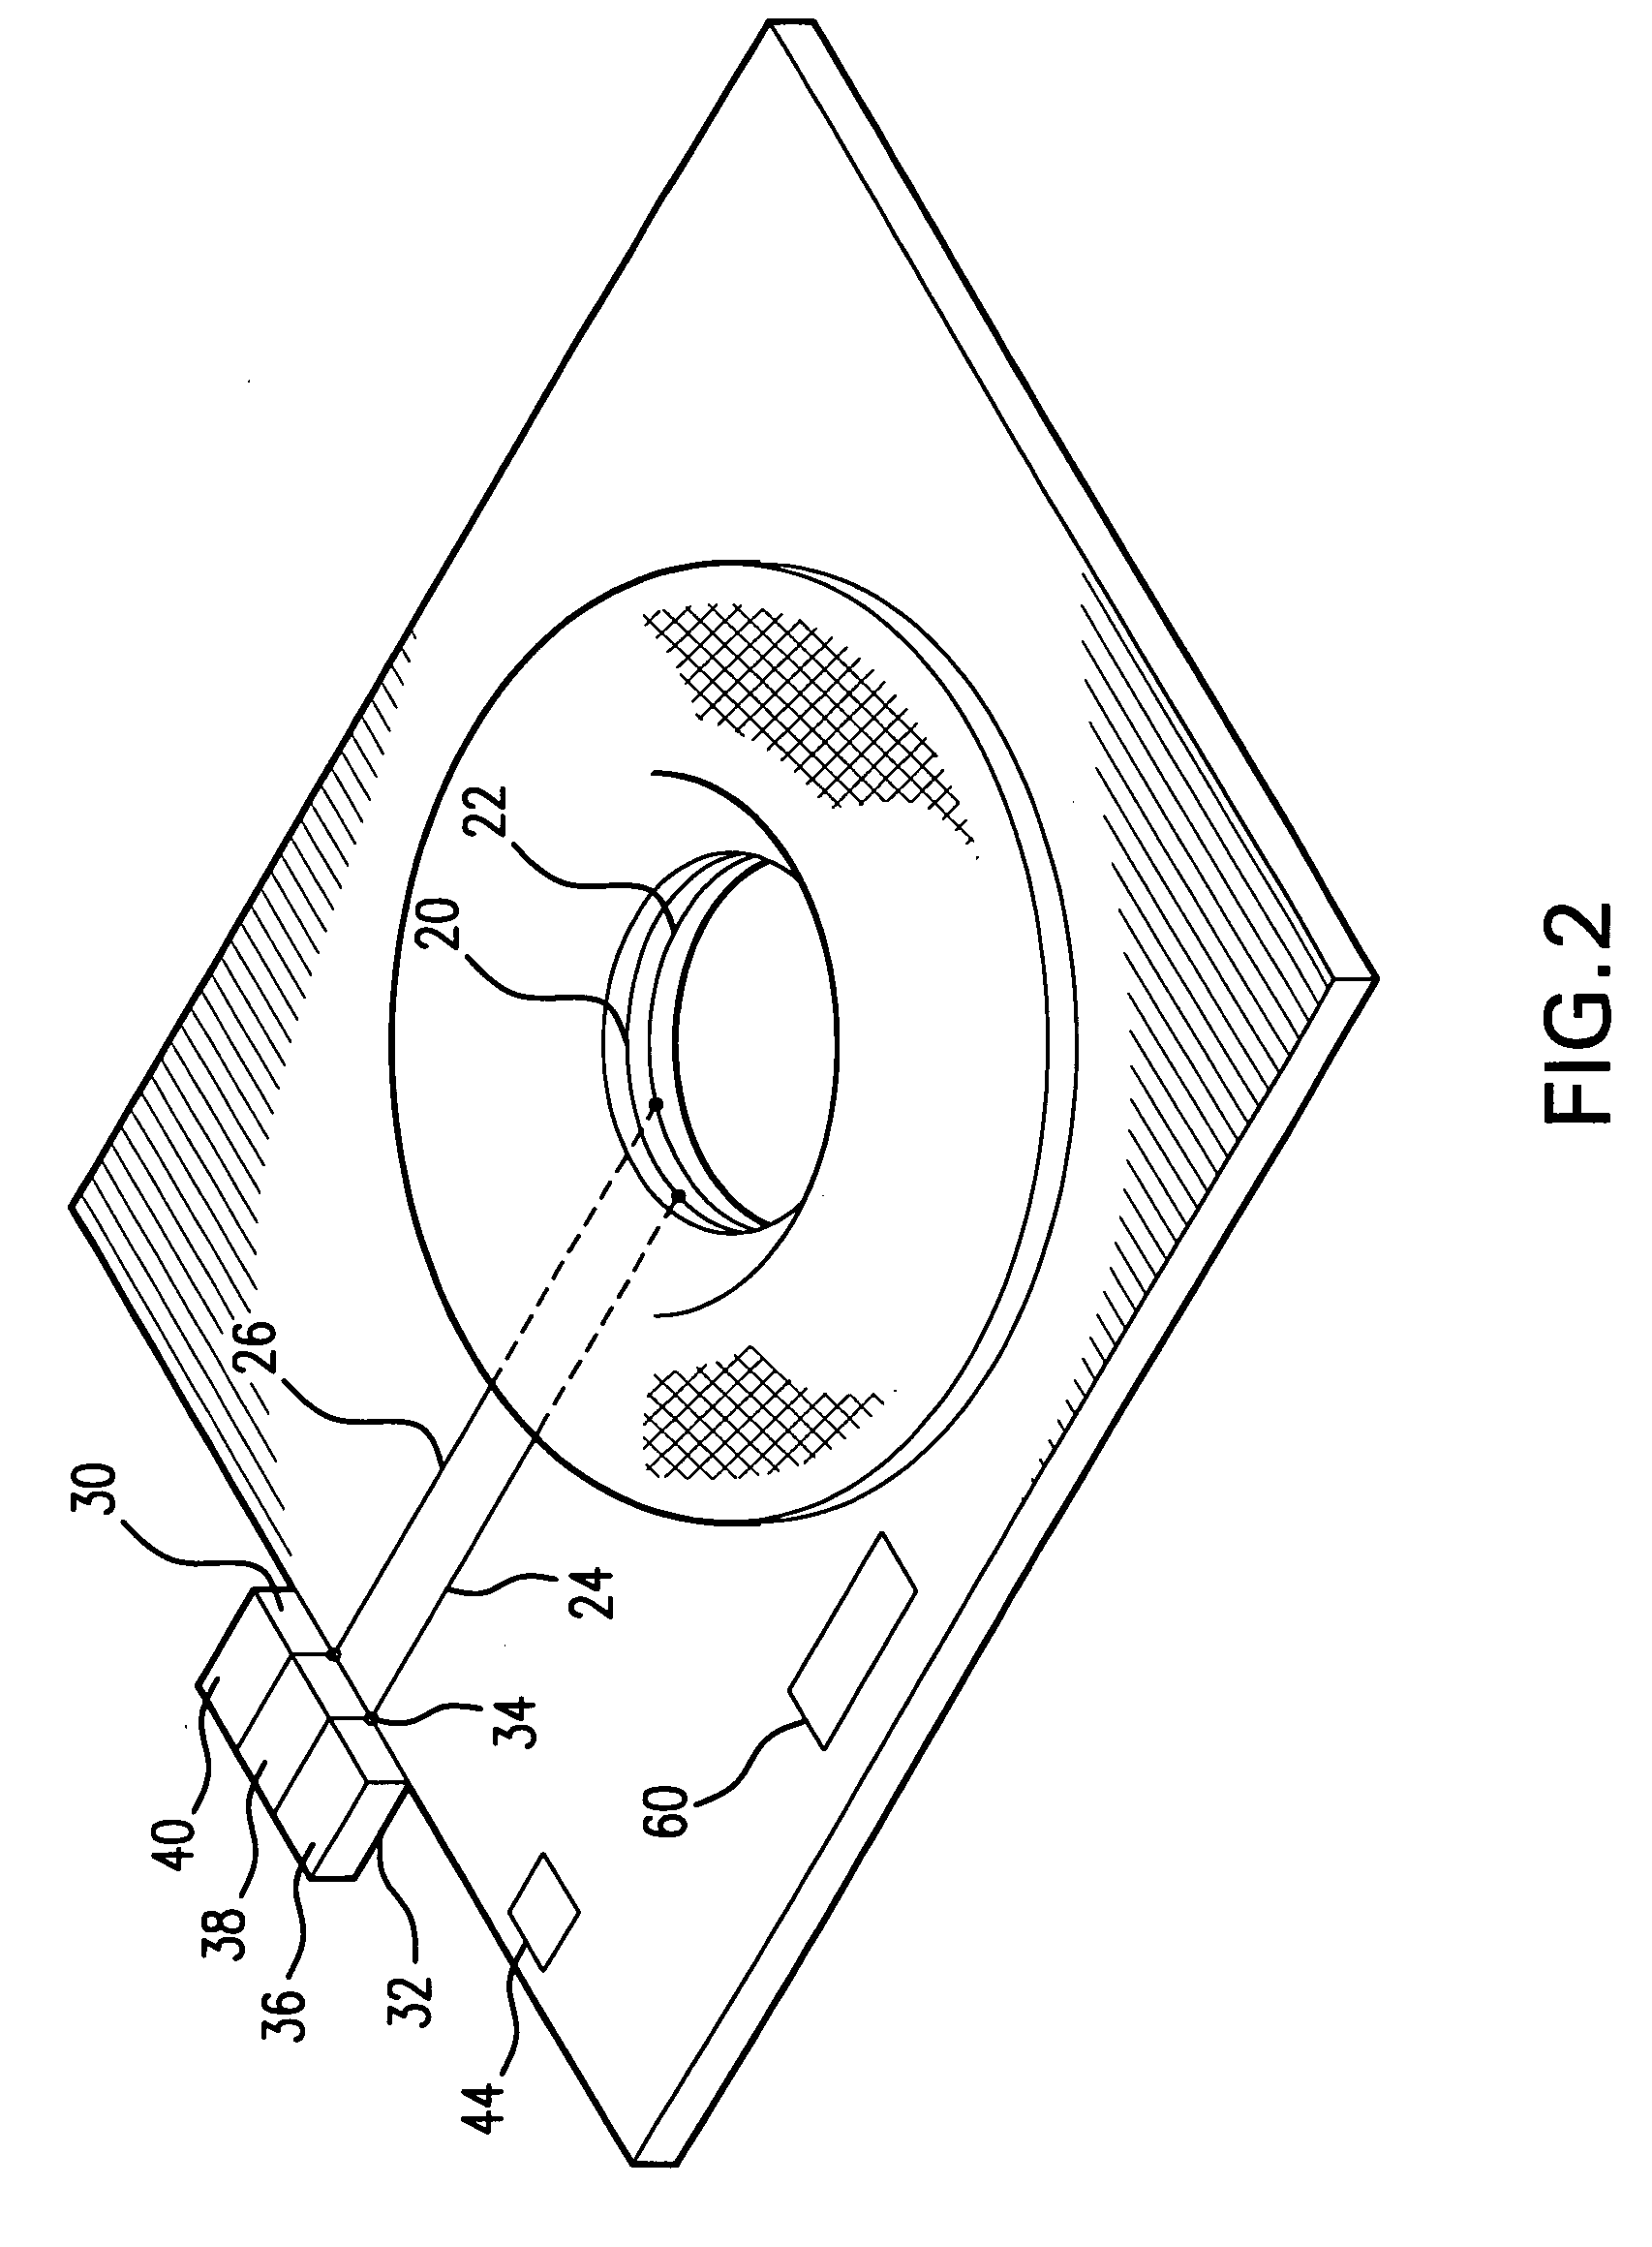 Colostomy alert device and method